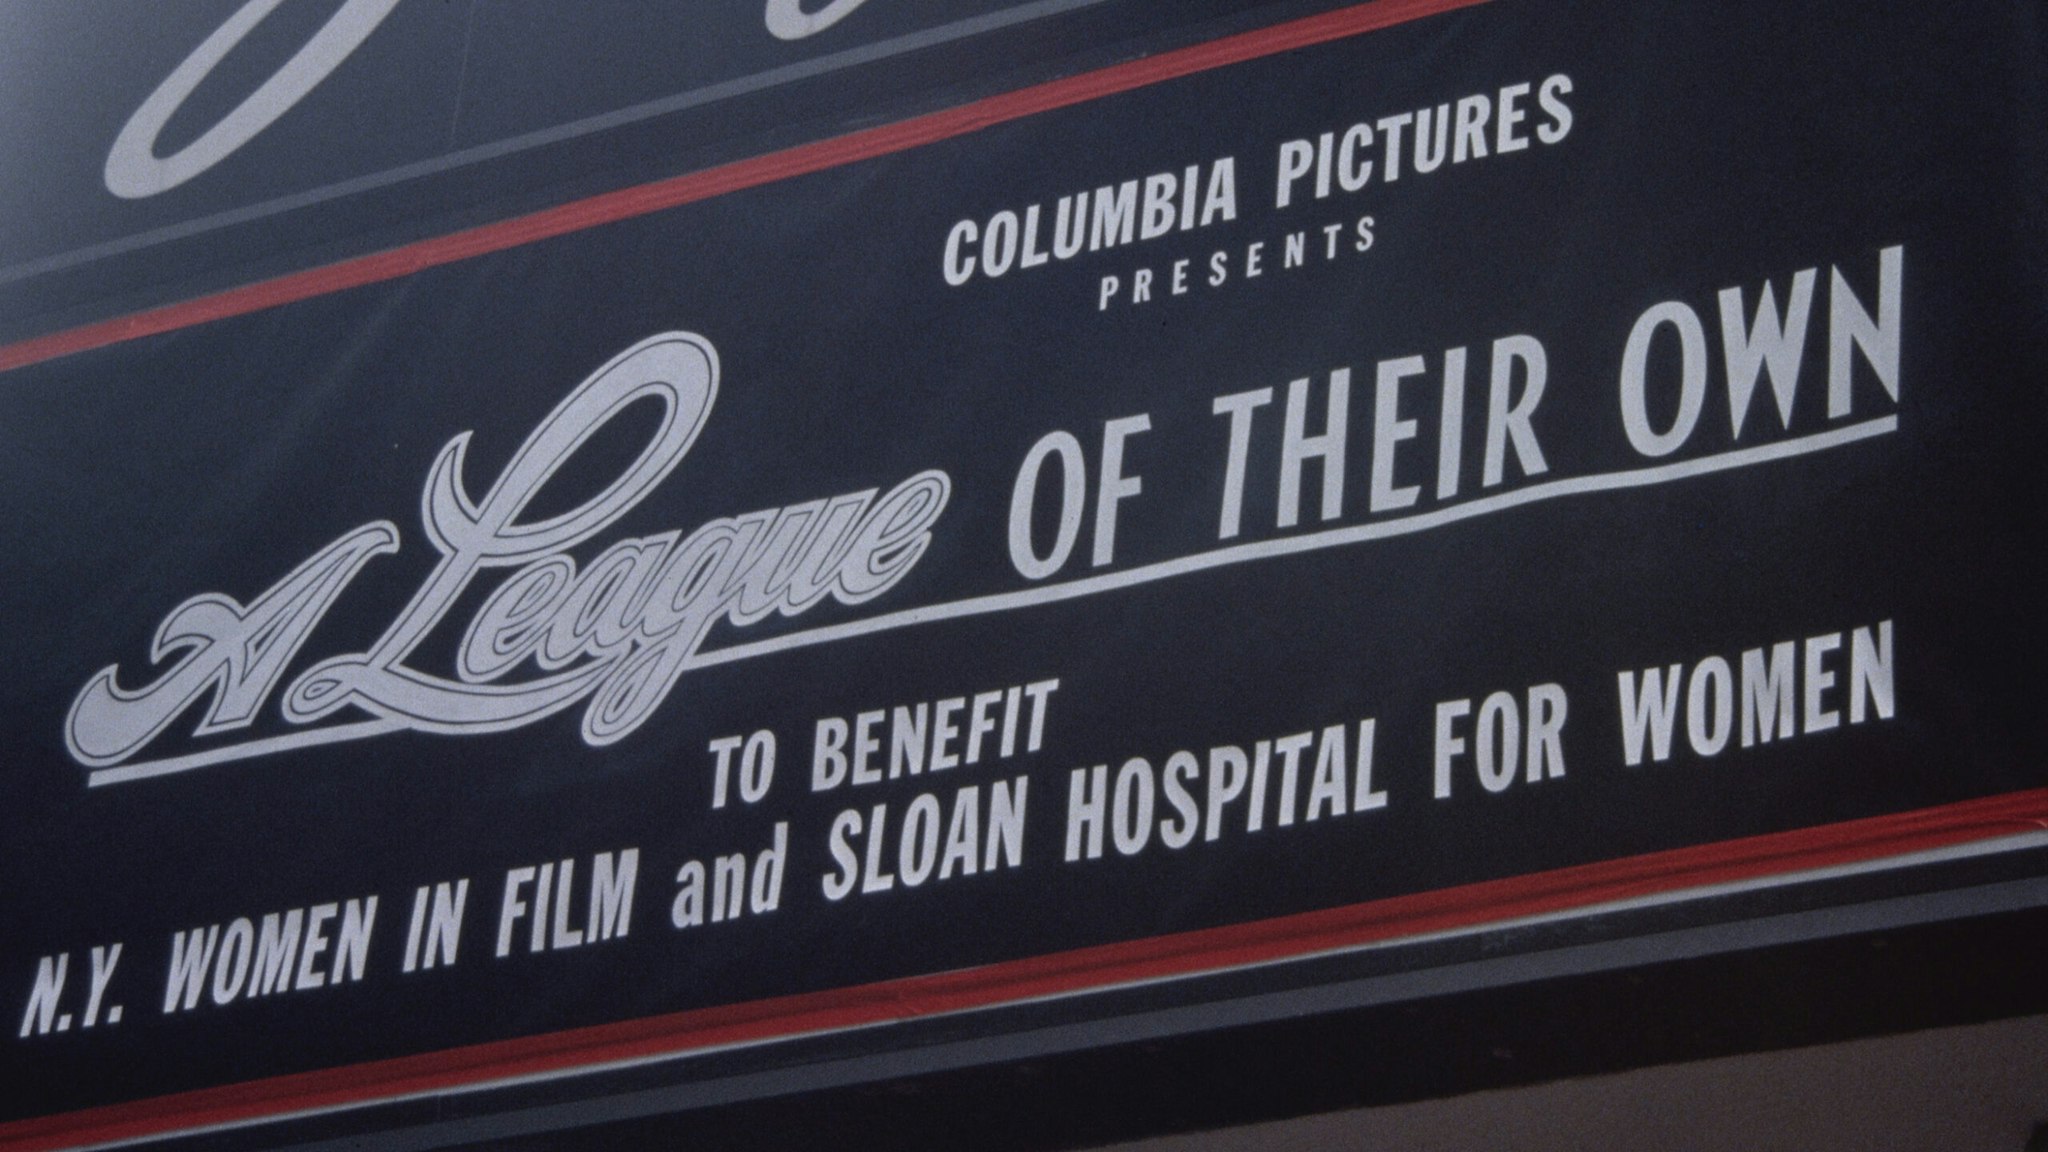 The Ziegfeld Theatre in New York City showing the Columbia Pictures film 'A League of Their Own' in aid of New York Women in Film and the Sloan (Sloane) Hospital for Women, 1992.